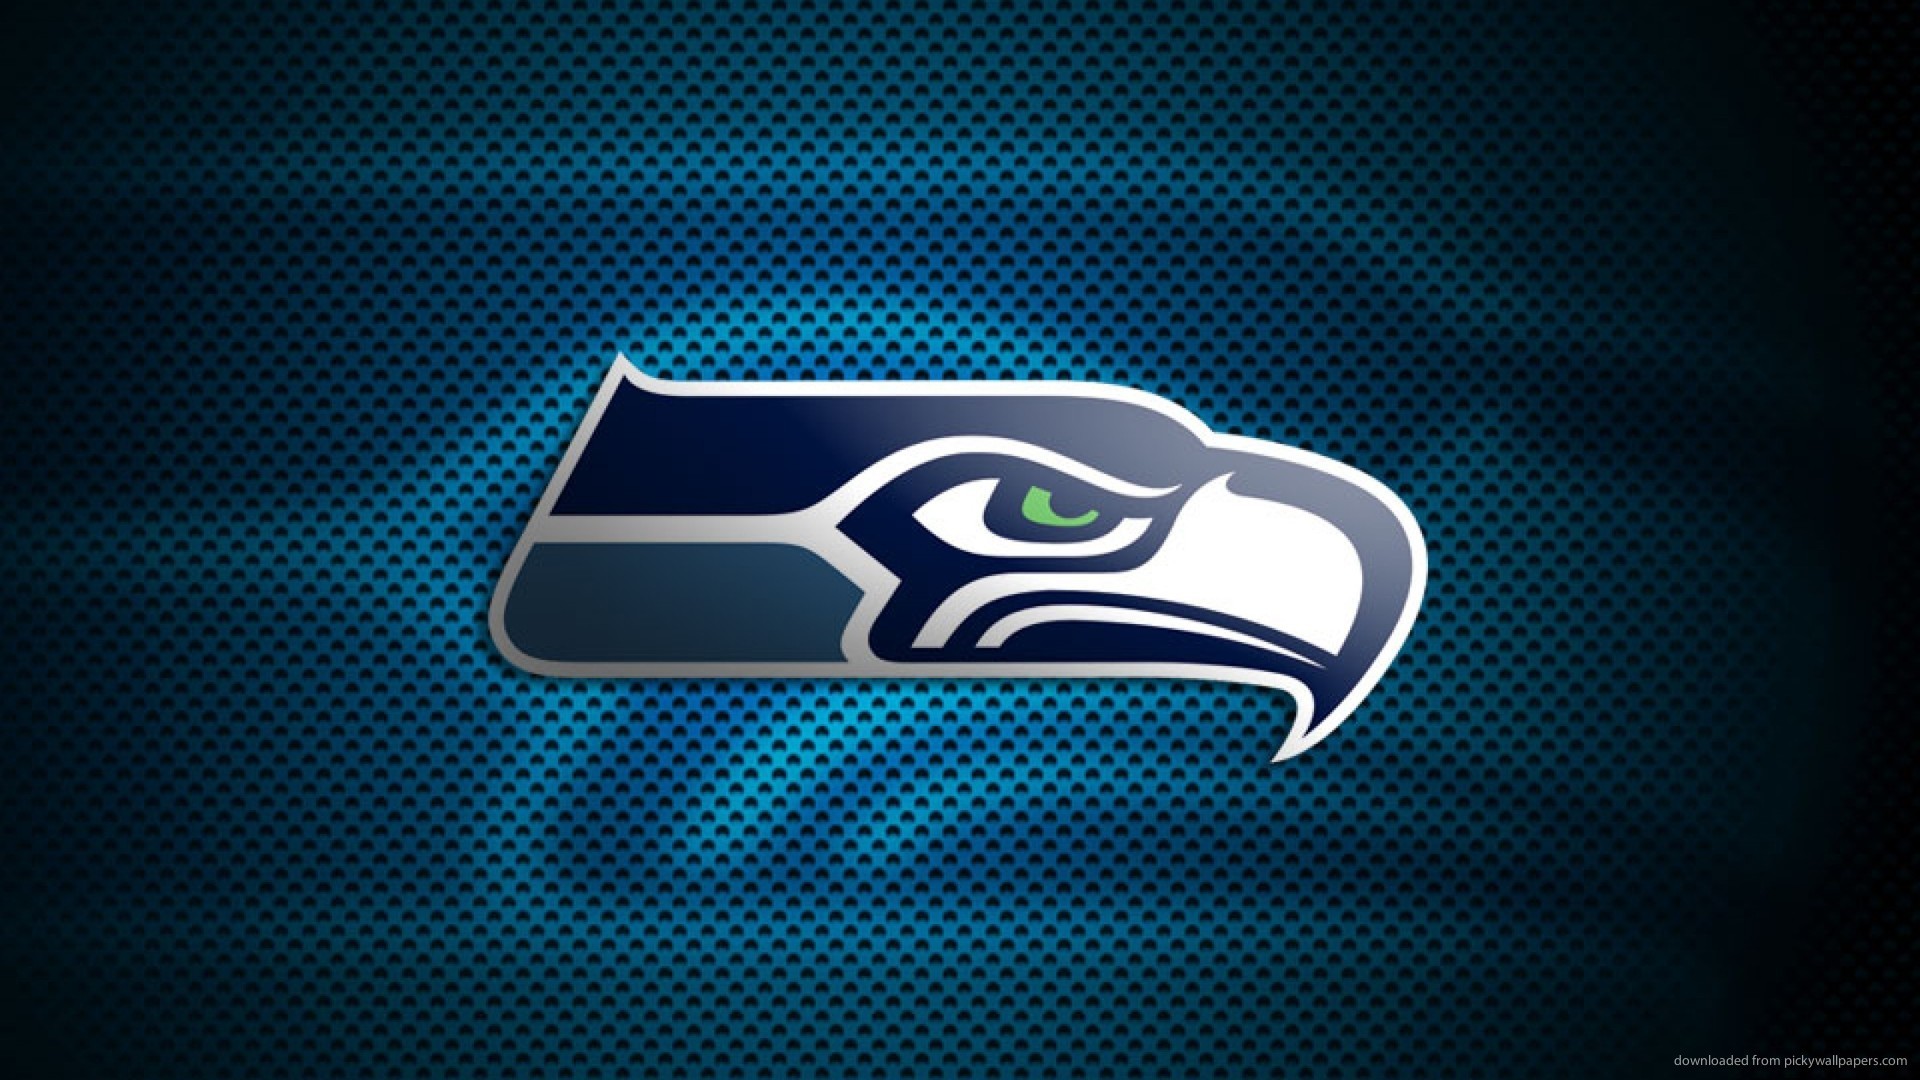 1920x1080 Seattle Seahawks Picture For iPhone, Blackberry, iPad, Seattle .